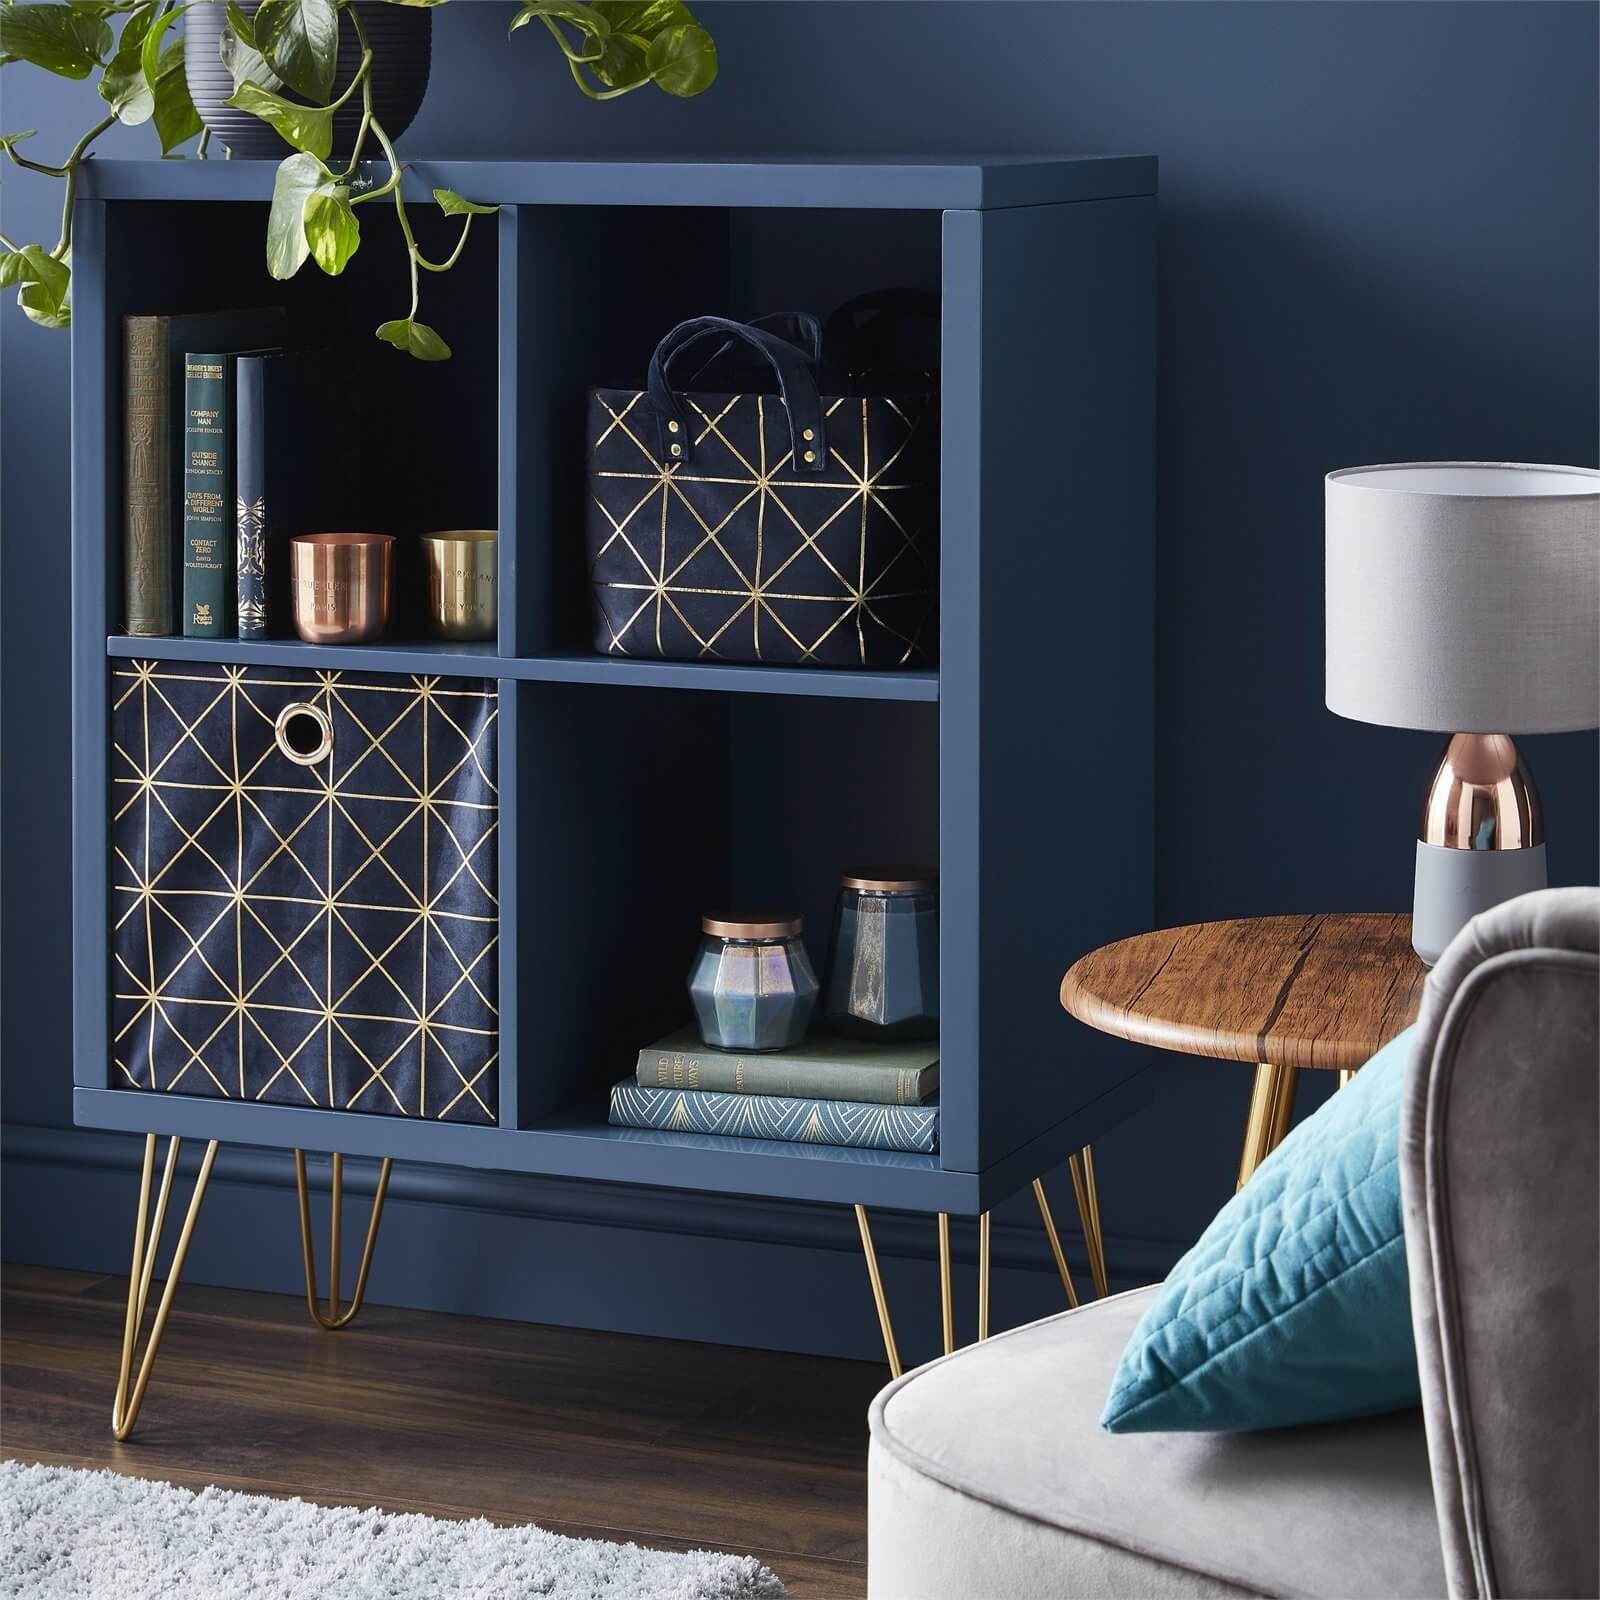 2x2 Cube Storage Unit - Orion Blue with Gold Metal Legs